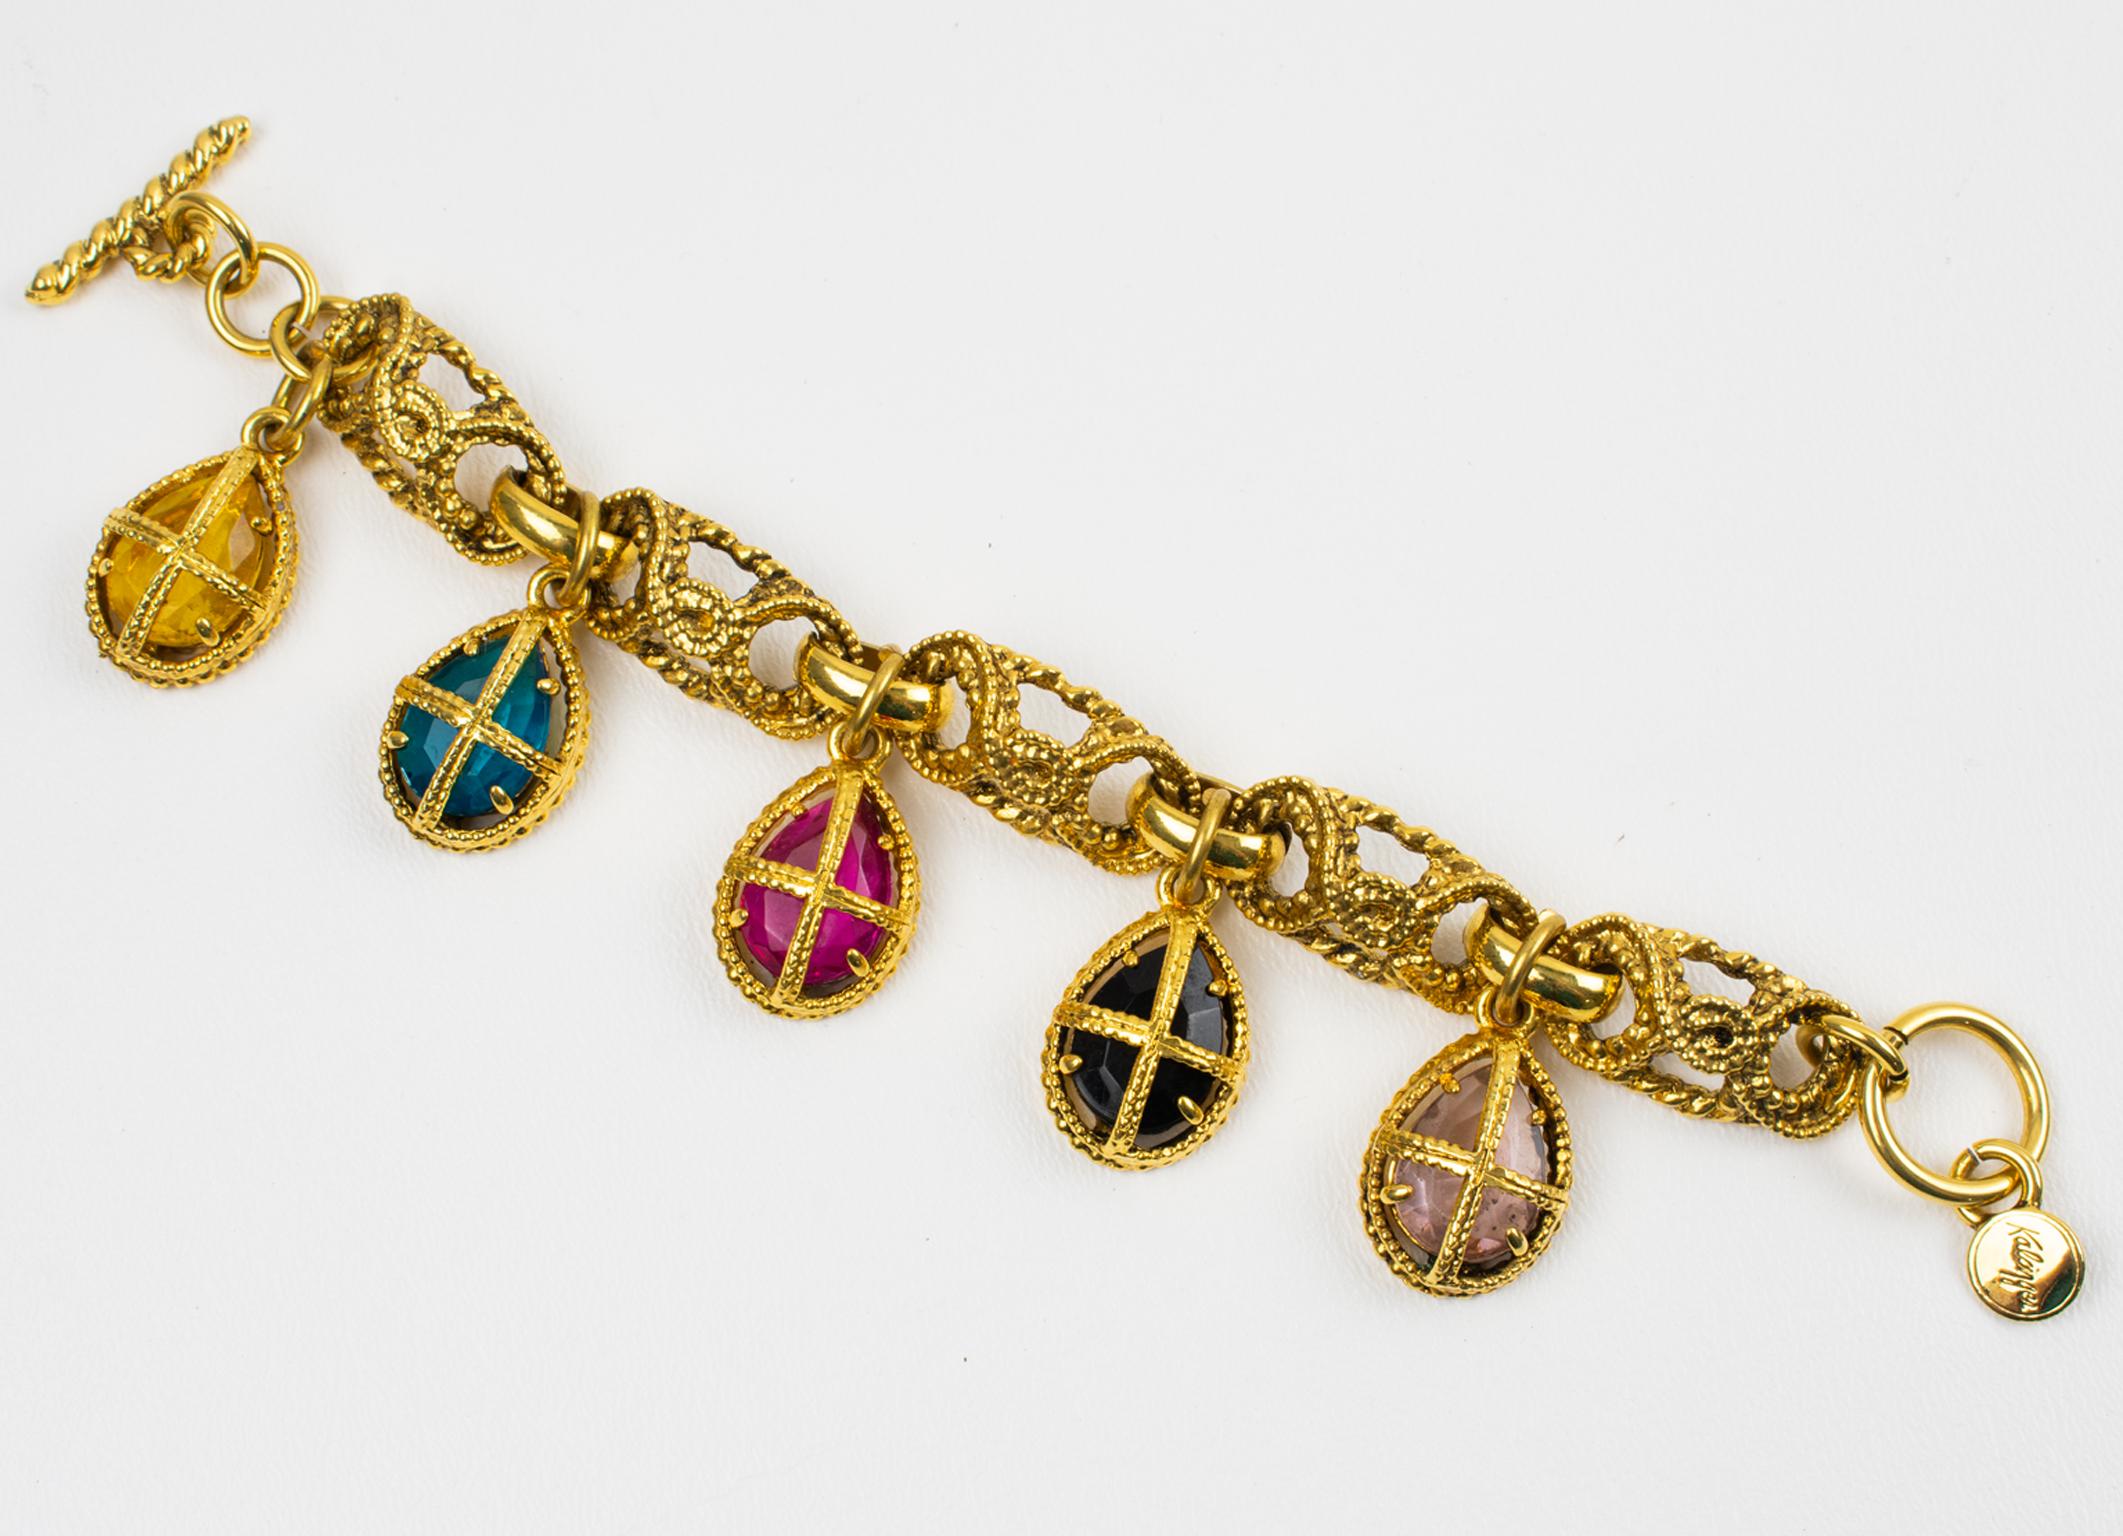 Exquisite Kalinger Paris romantic link bracelet. Chunky gilt metal all textured chain ornate with jewel dangling charms with cage trapped pear-shaped crystal rhinestones. Assorted colors of topaz yellow, emerald turquoise, fuchsia pink, licorice